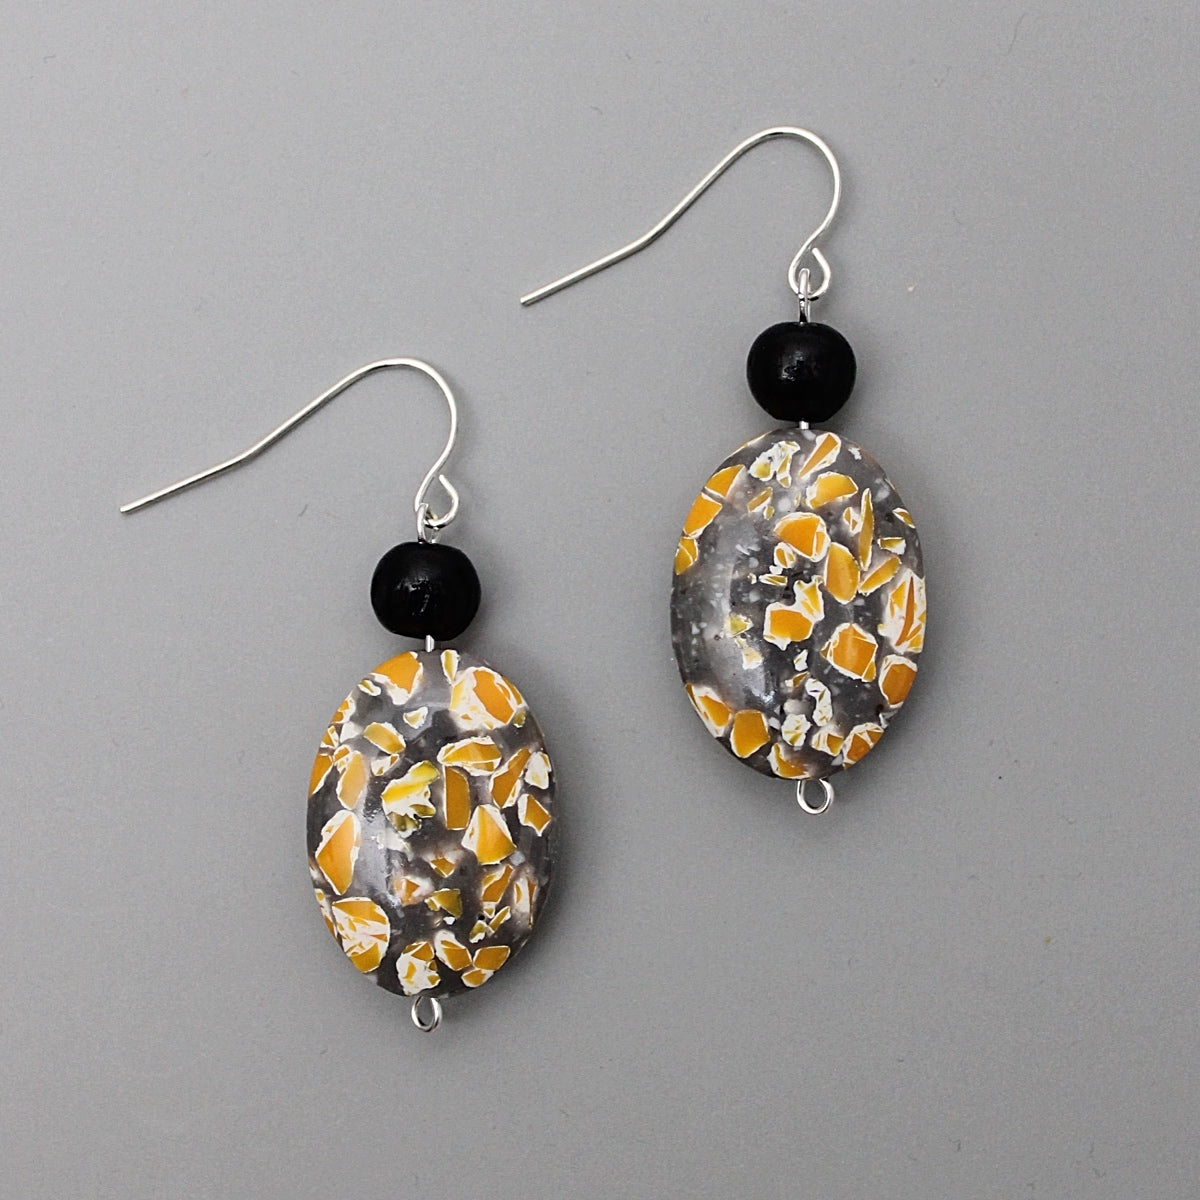 Gray and Yellow Granite Oval Earrings